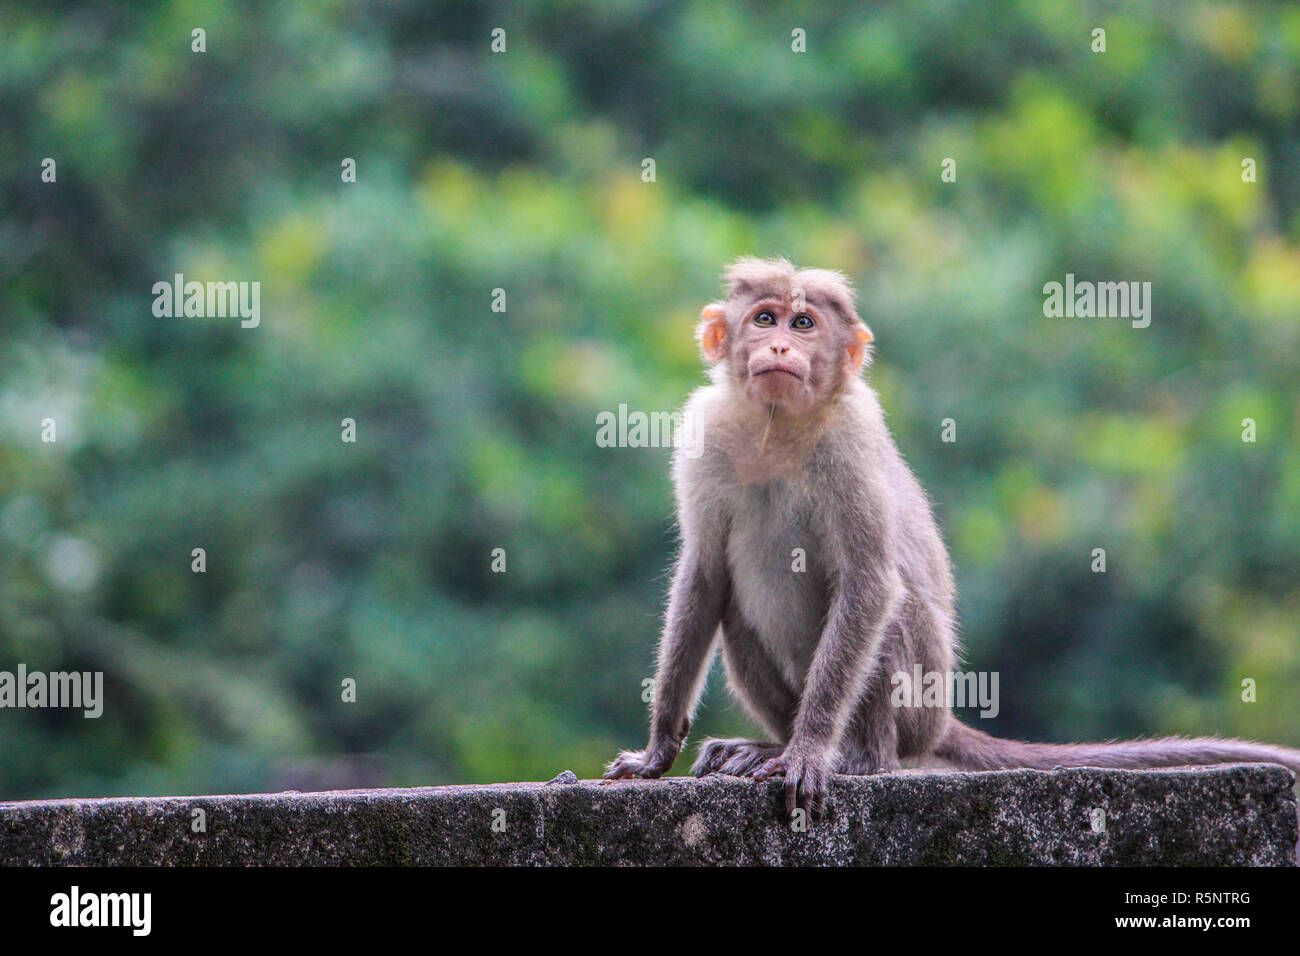 Photograph of an Indian monkey looking upwards and sitting on a wall with green background from Athirappilyy falls, Kerala, India. Stock Photo